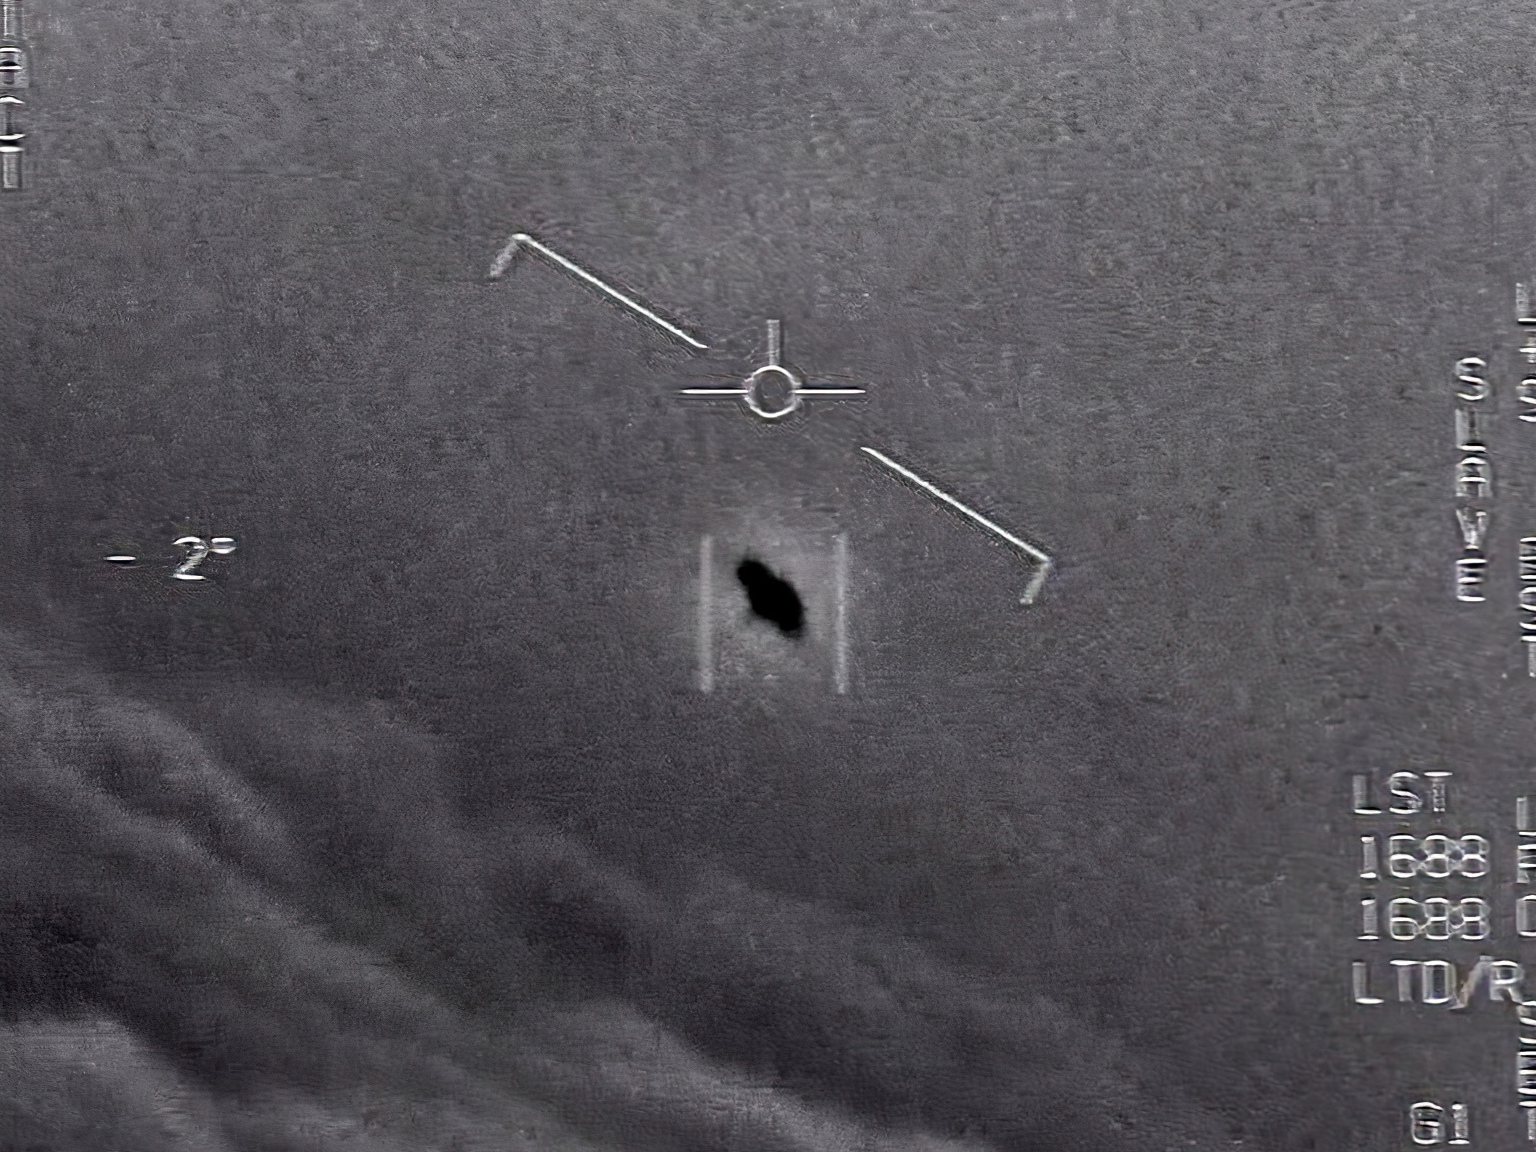 Which famous incident in 1947 sparked worldwide interest in UFOs?